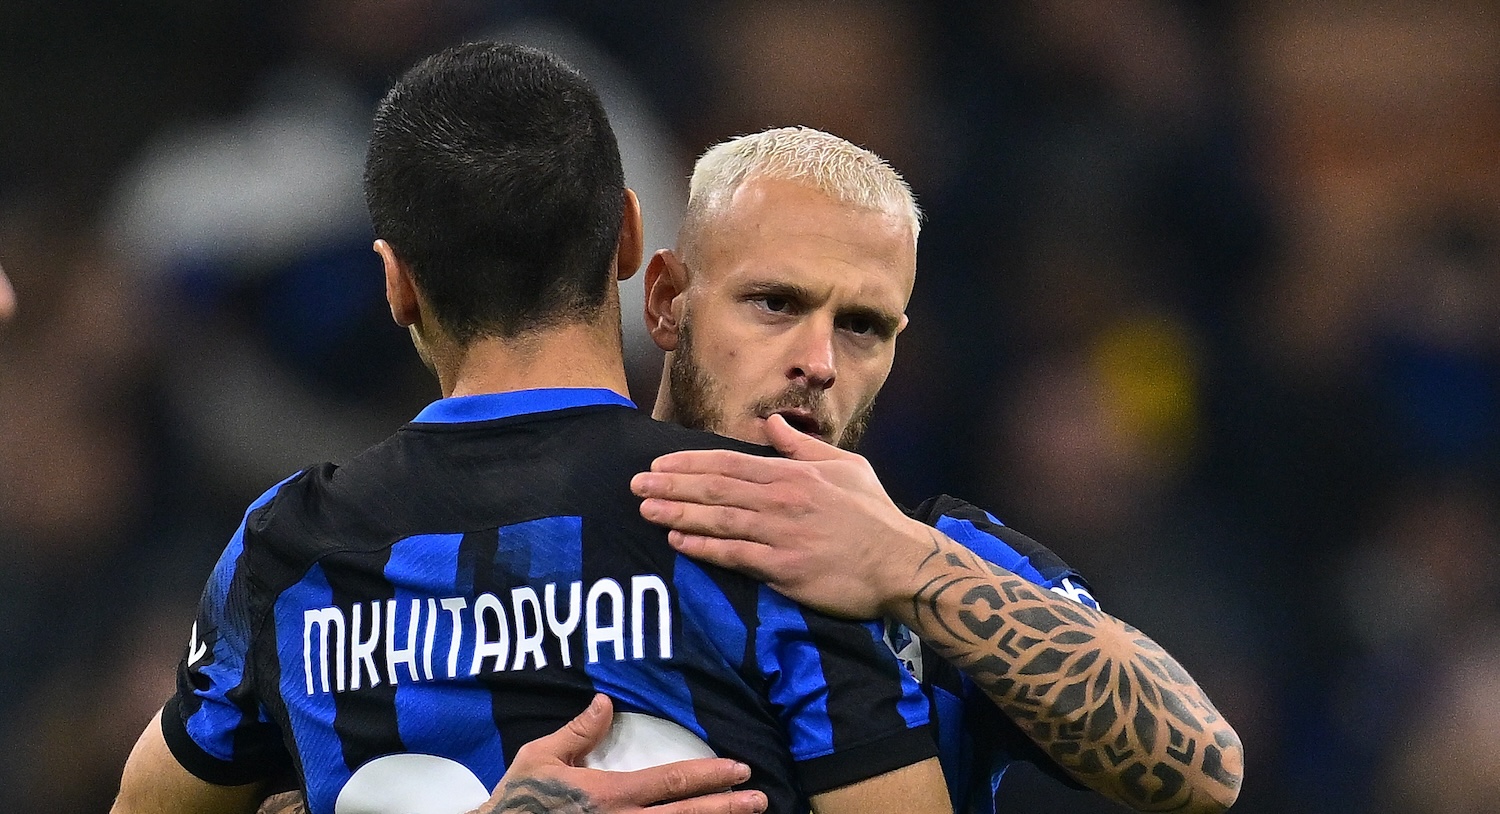 Inter have been wrapped up the negotiations with Federico Dimarco and Henrikh Mkhitaryan, and their extensions could be announced as soon as Friday.